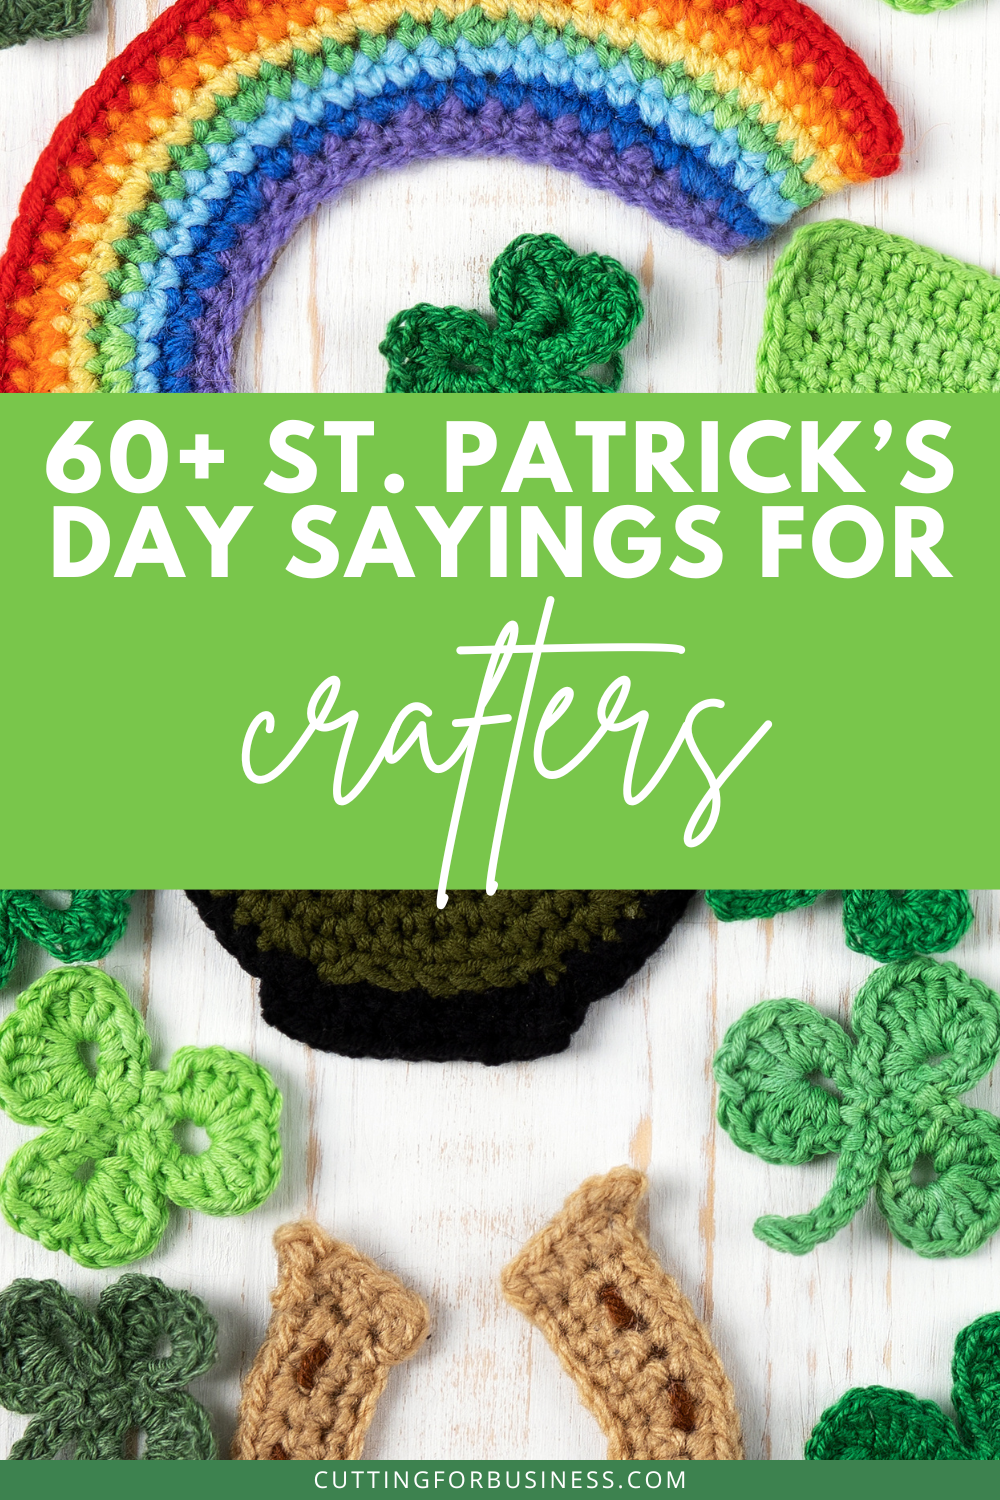 60+ St. Patrick's Day Sayings for Crafters - cuttingforbusiness.com